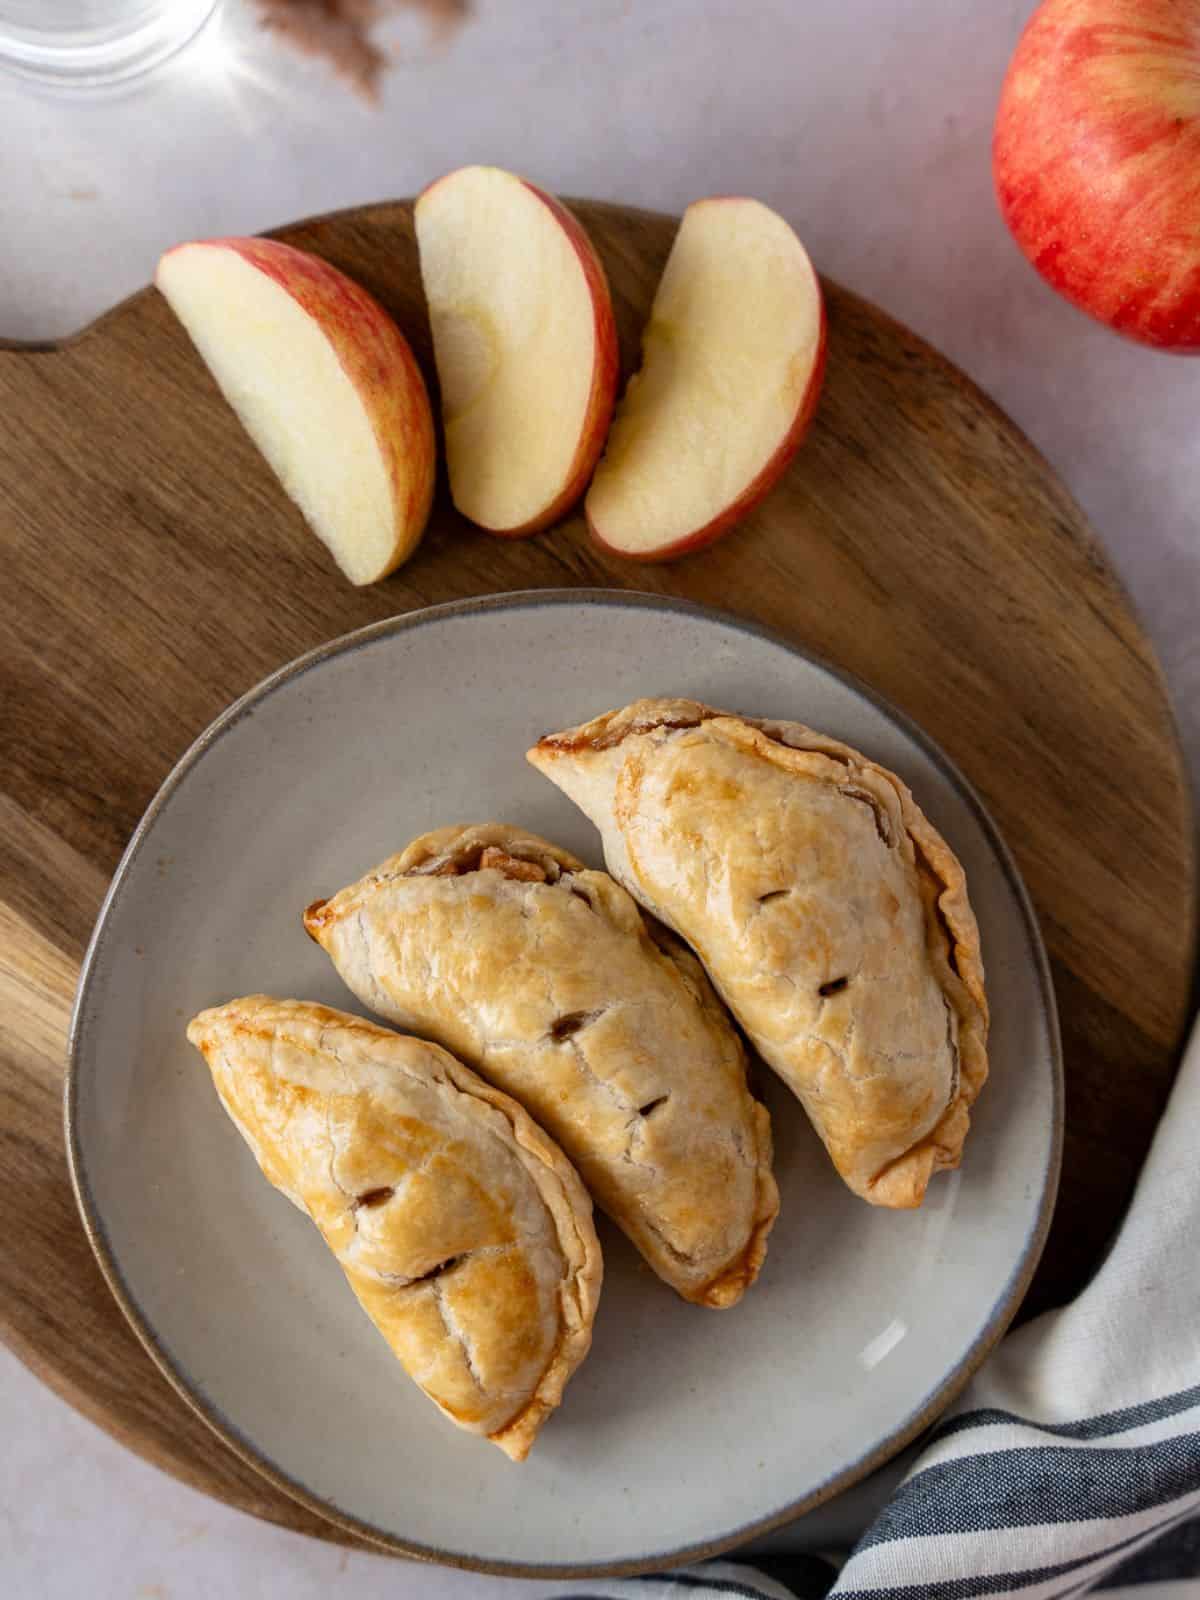 Three baked apple empanadas on a plate with some sliced apples on the side.